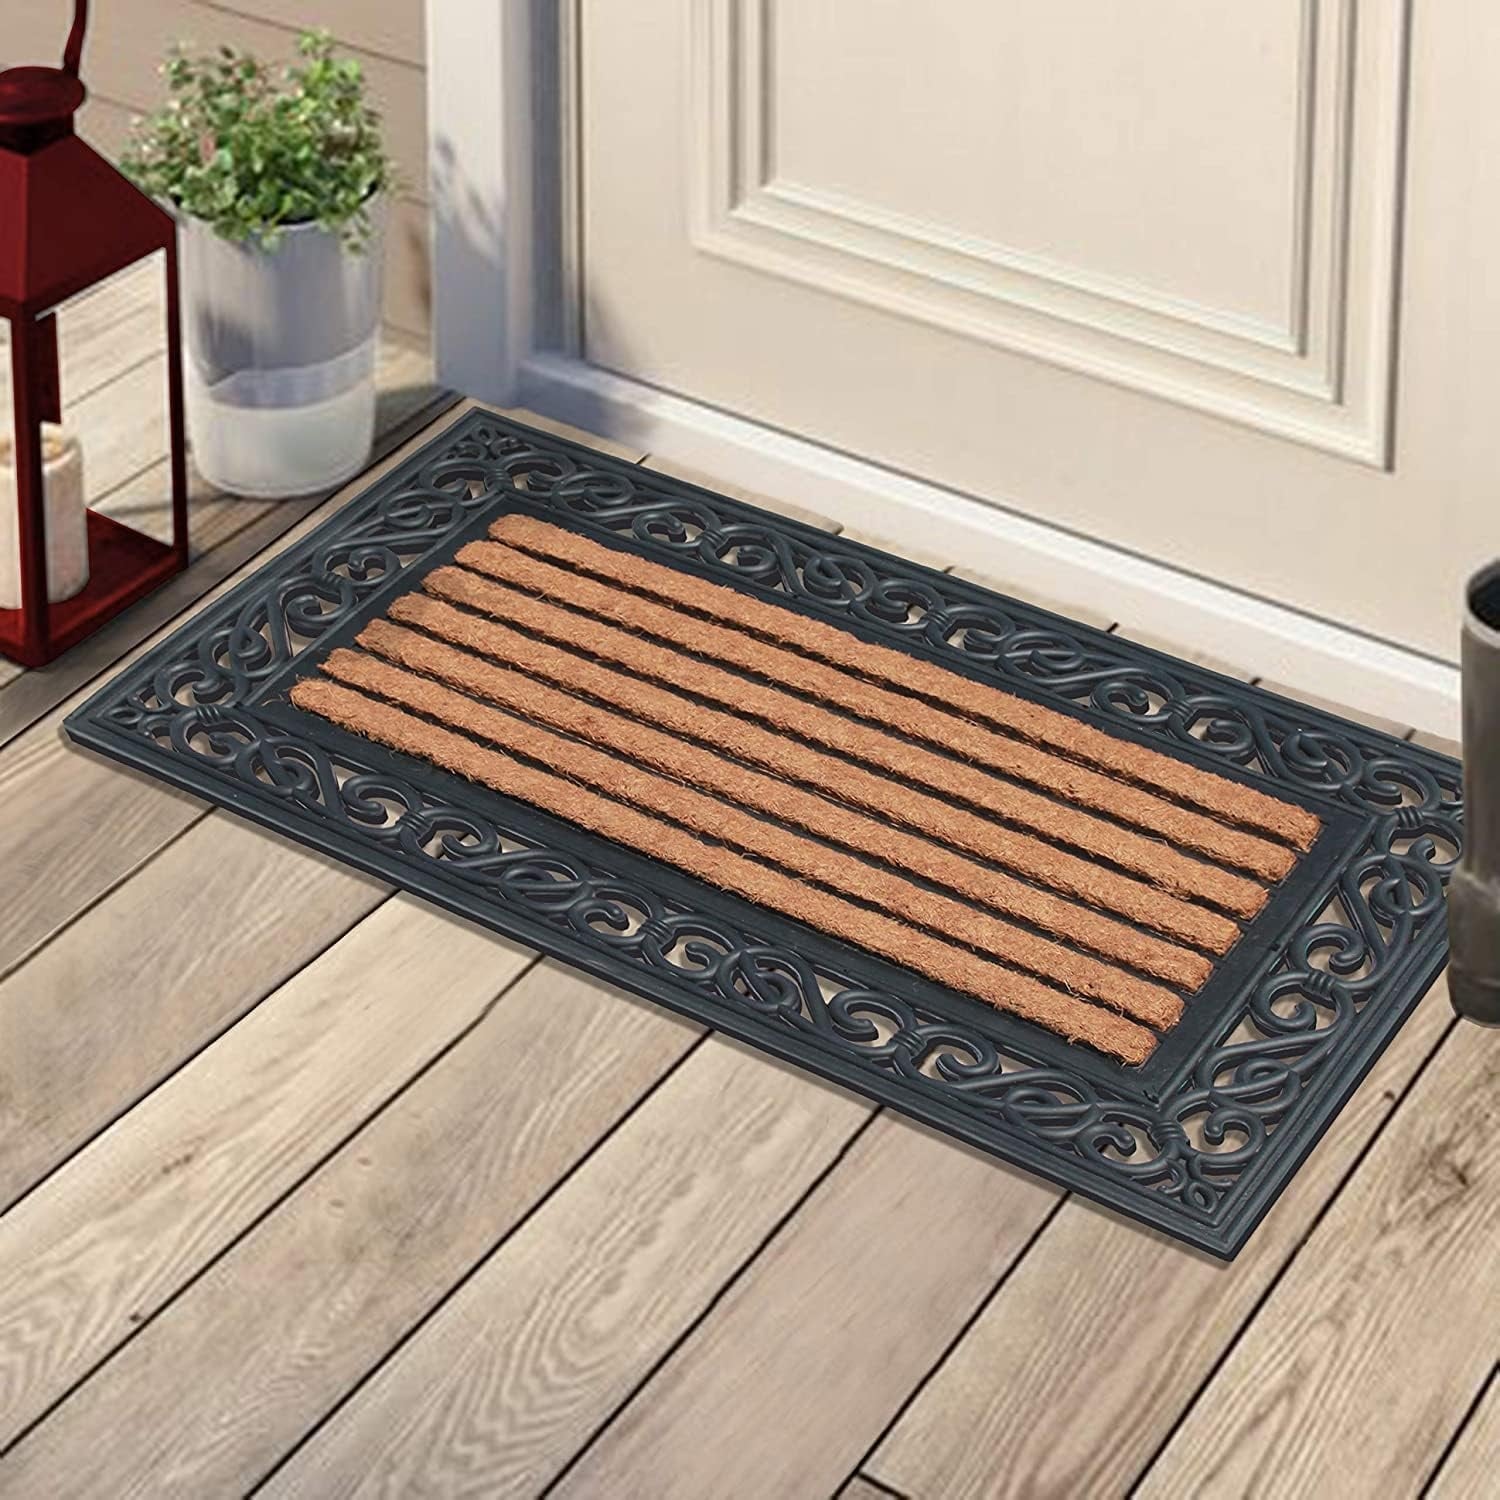 https://ak1.ostkcdn.com/images/products/is/images/direct/cdba87f38ceda8f33ec36f48dd87fe130a776797/A1HC-Rubber-and-Coir-Large-Heavy-Duty-Outdoor-Doormat%2C-23%22X38%22-Black.jpg